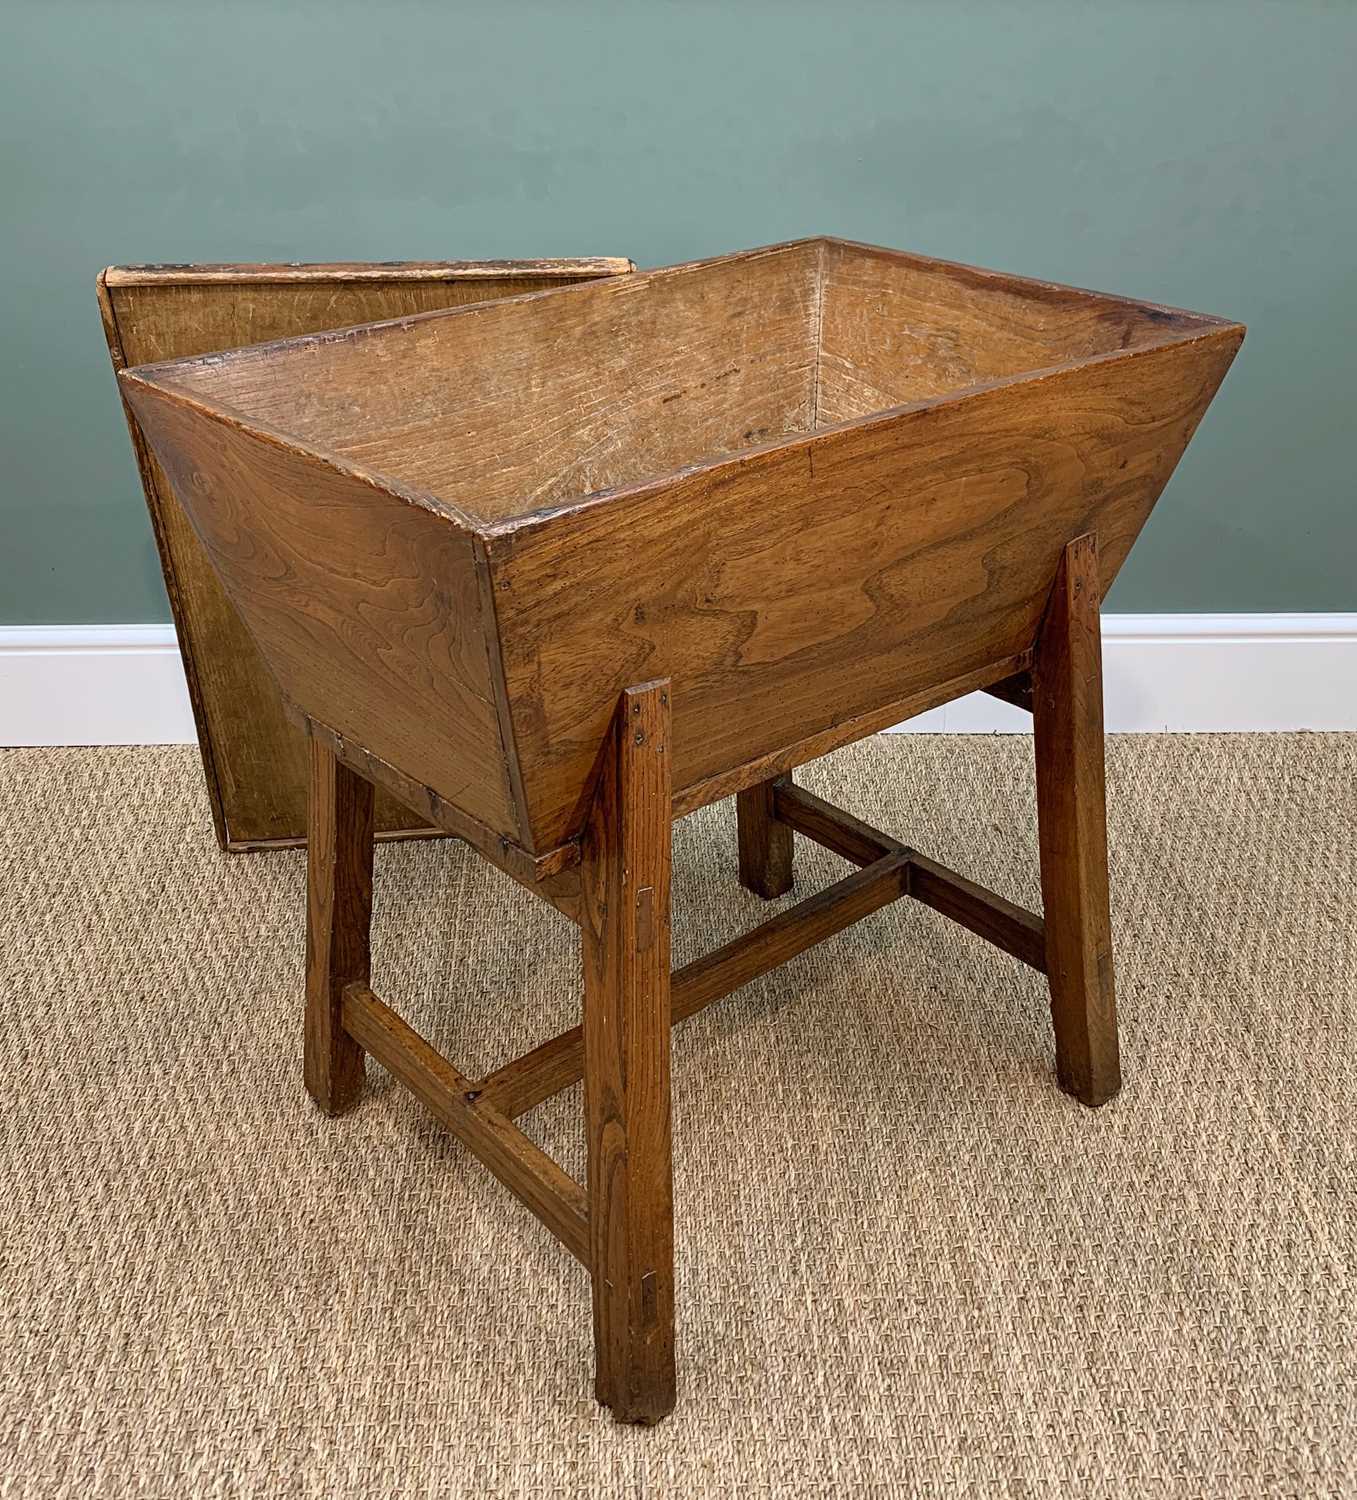 WELSH ELM STANDING DOUGH BIN early 19th Century, lift-up cover, on splayed legs. h-stretcher - Image 2 of 5